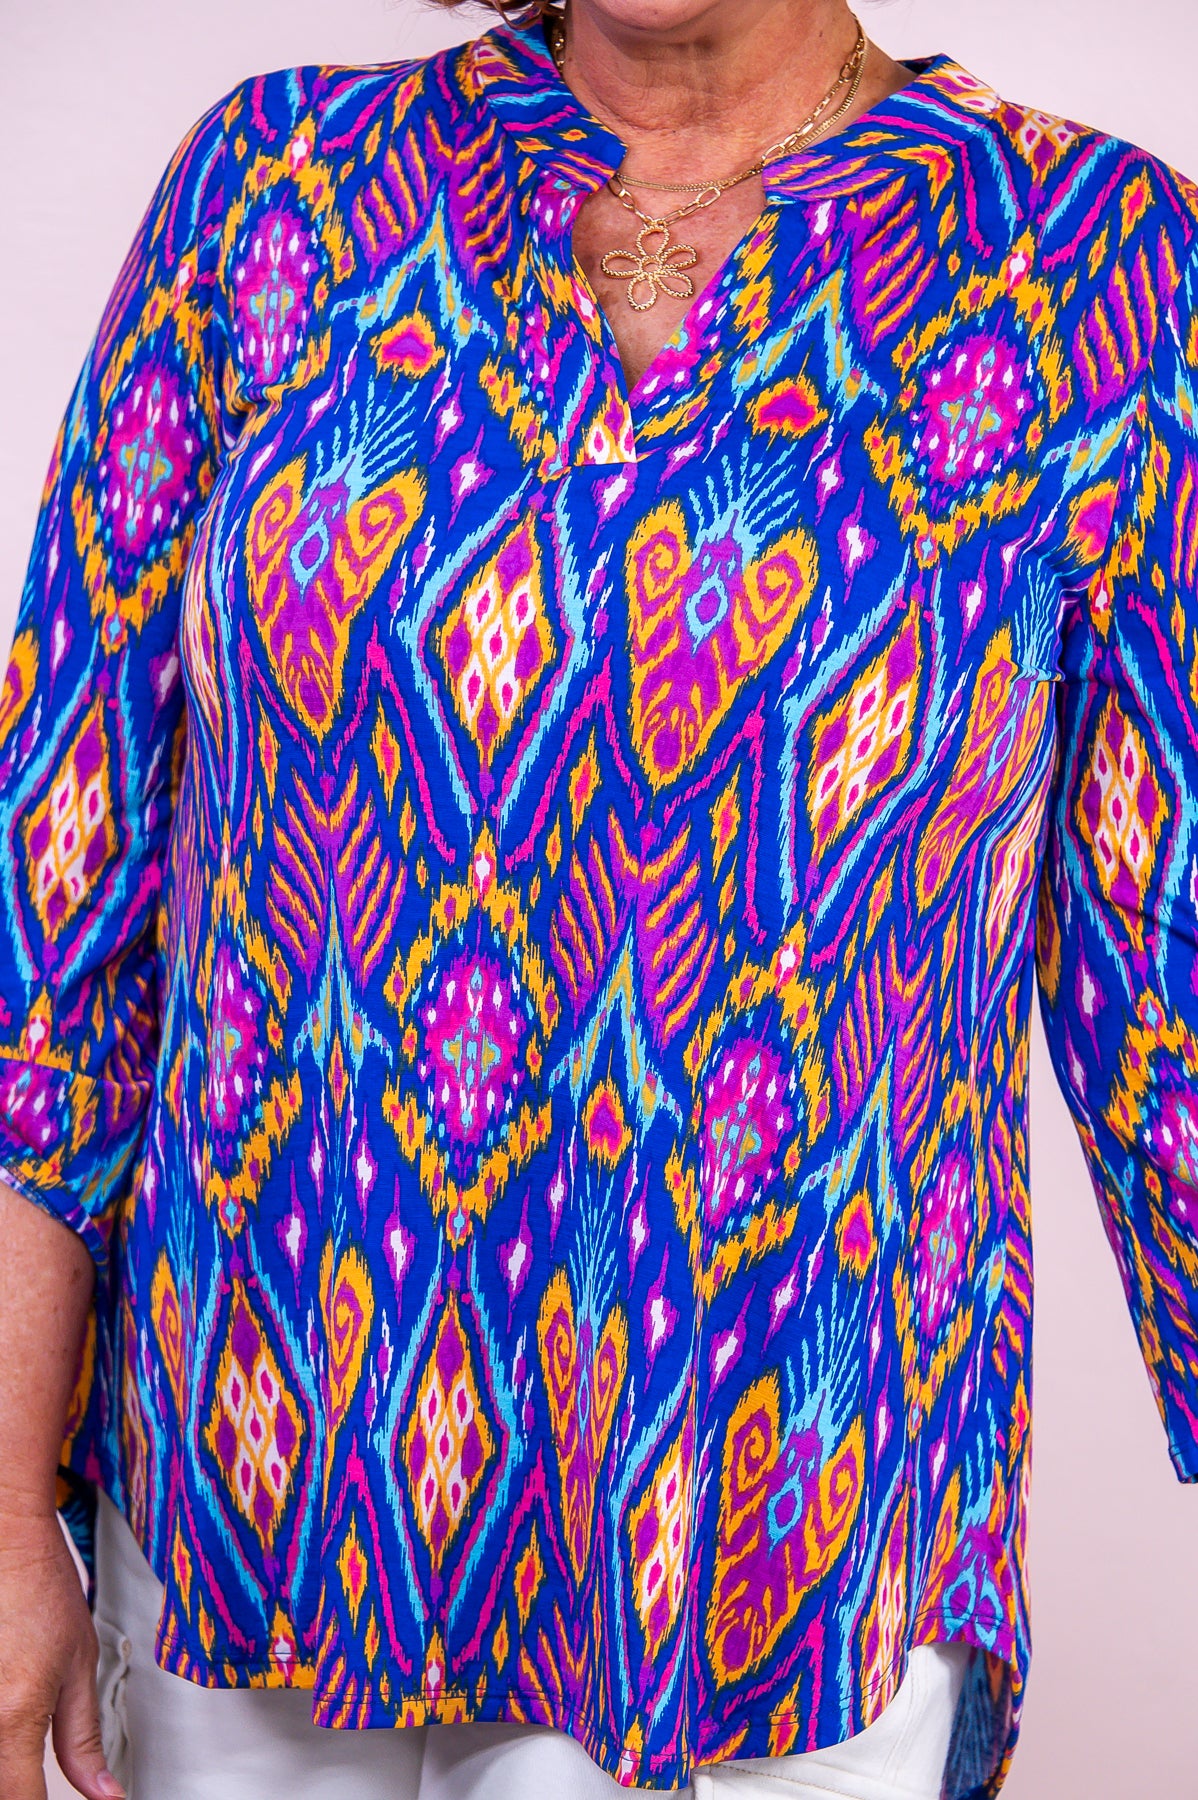 Stylin' Everyday Royal Blue/Multi Color Printed Top - T9437RBL